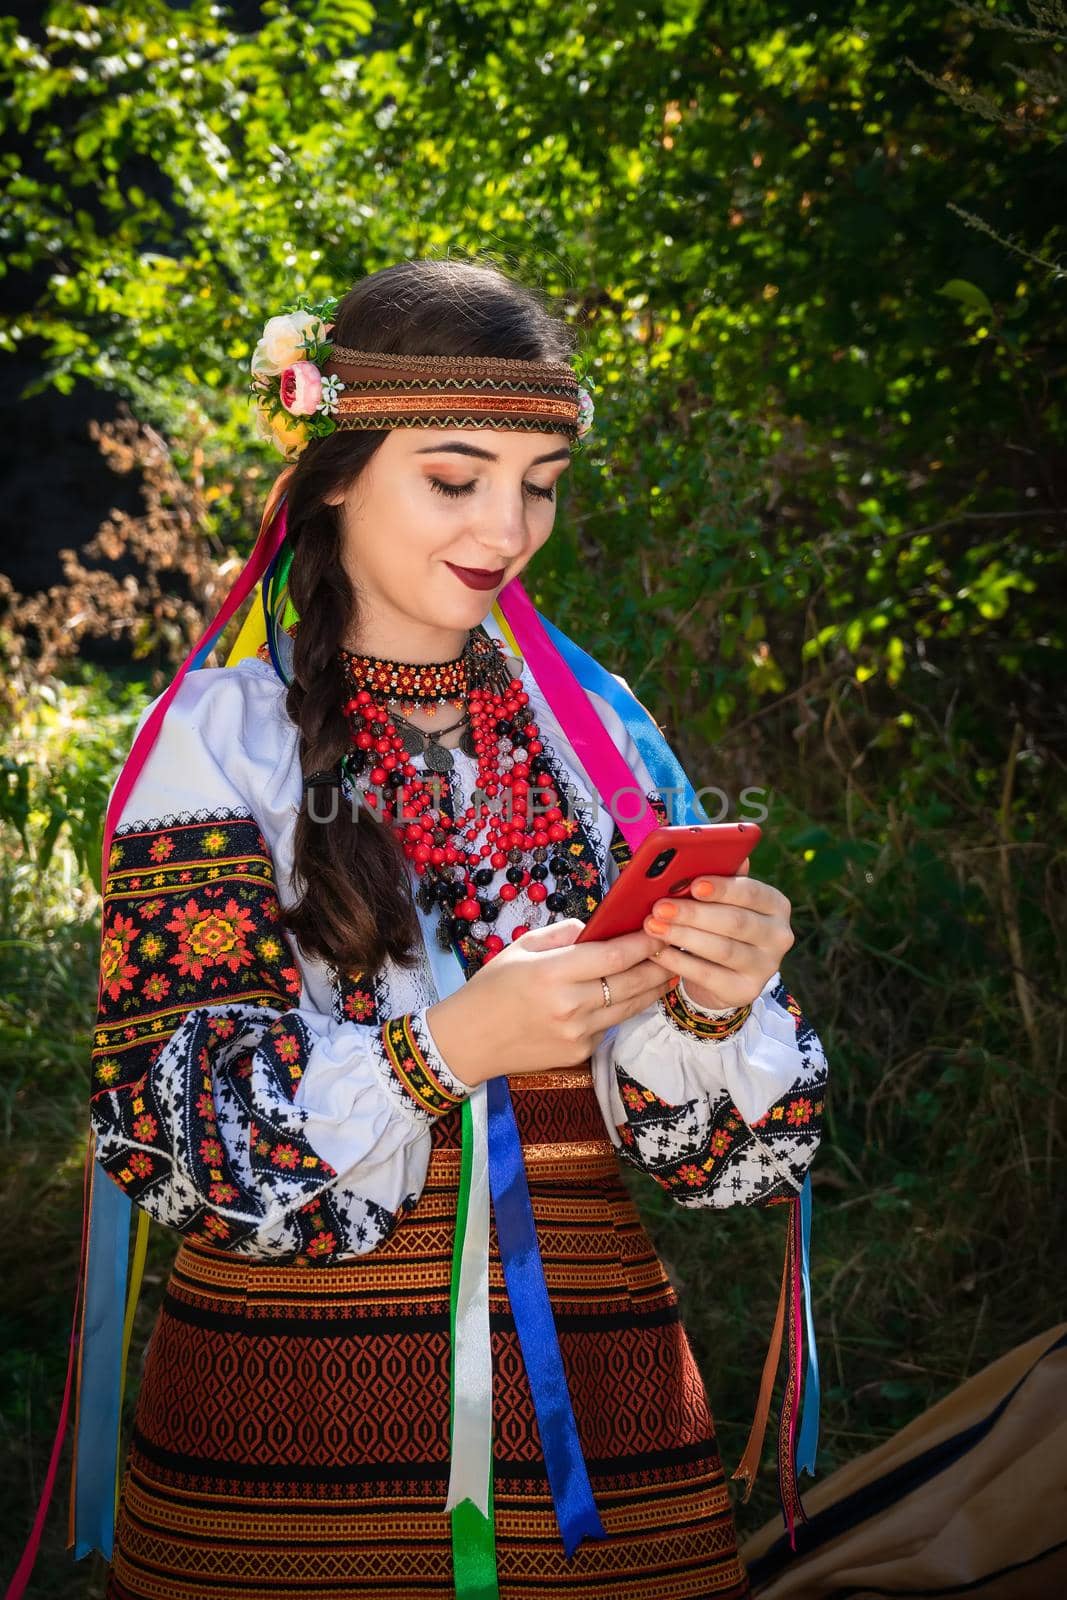 Ukrainian woman in an embroidered shirt holds a mobile phone in her hands by Serhii_Voroshchuk